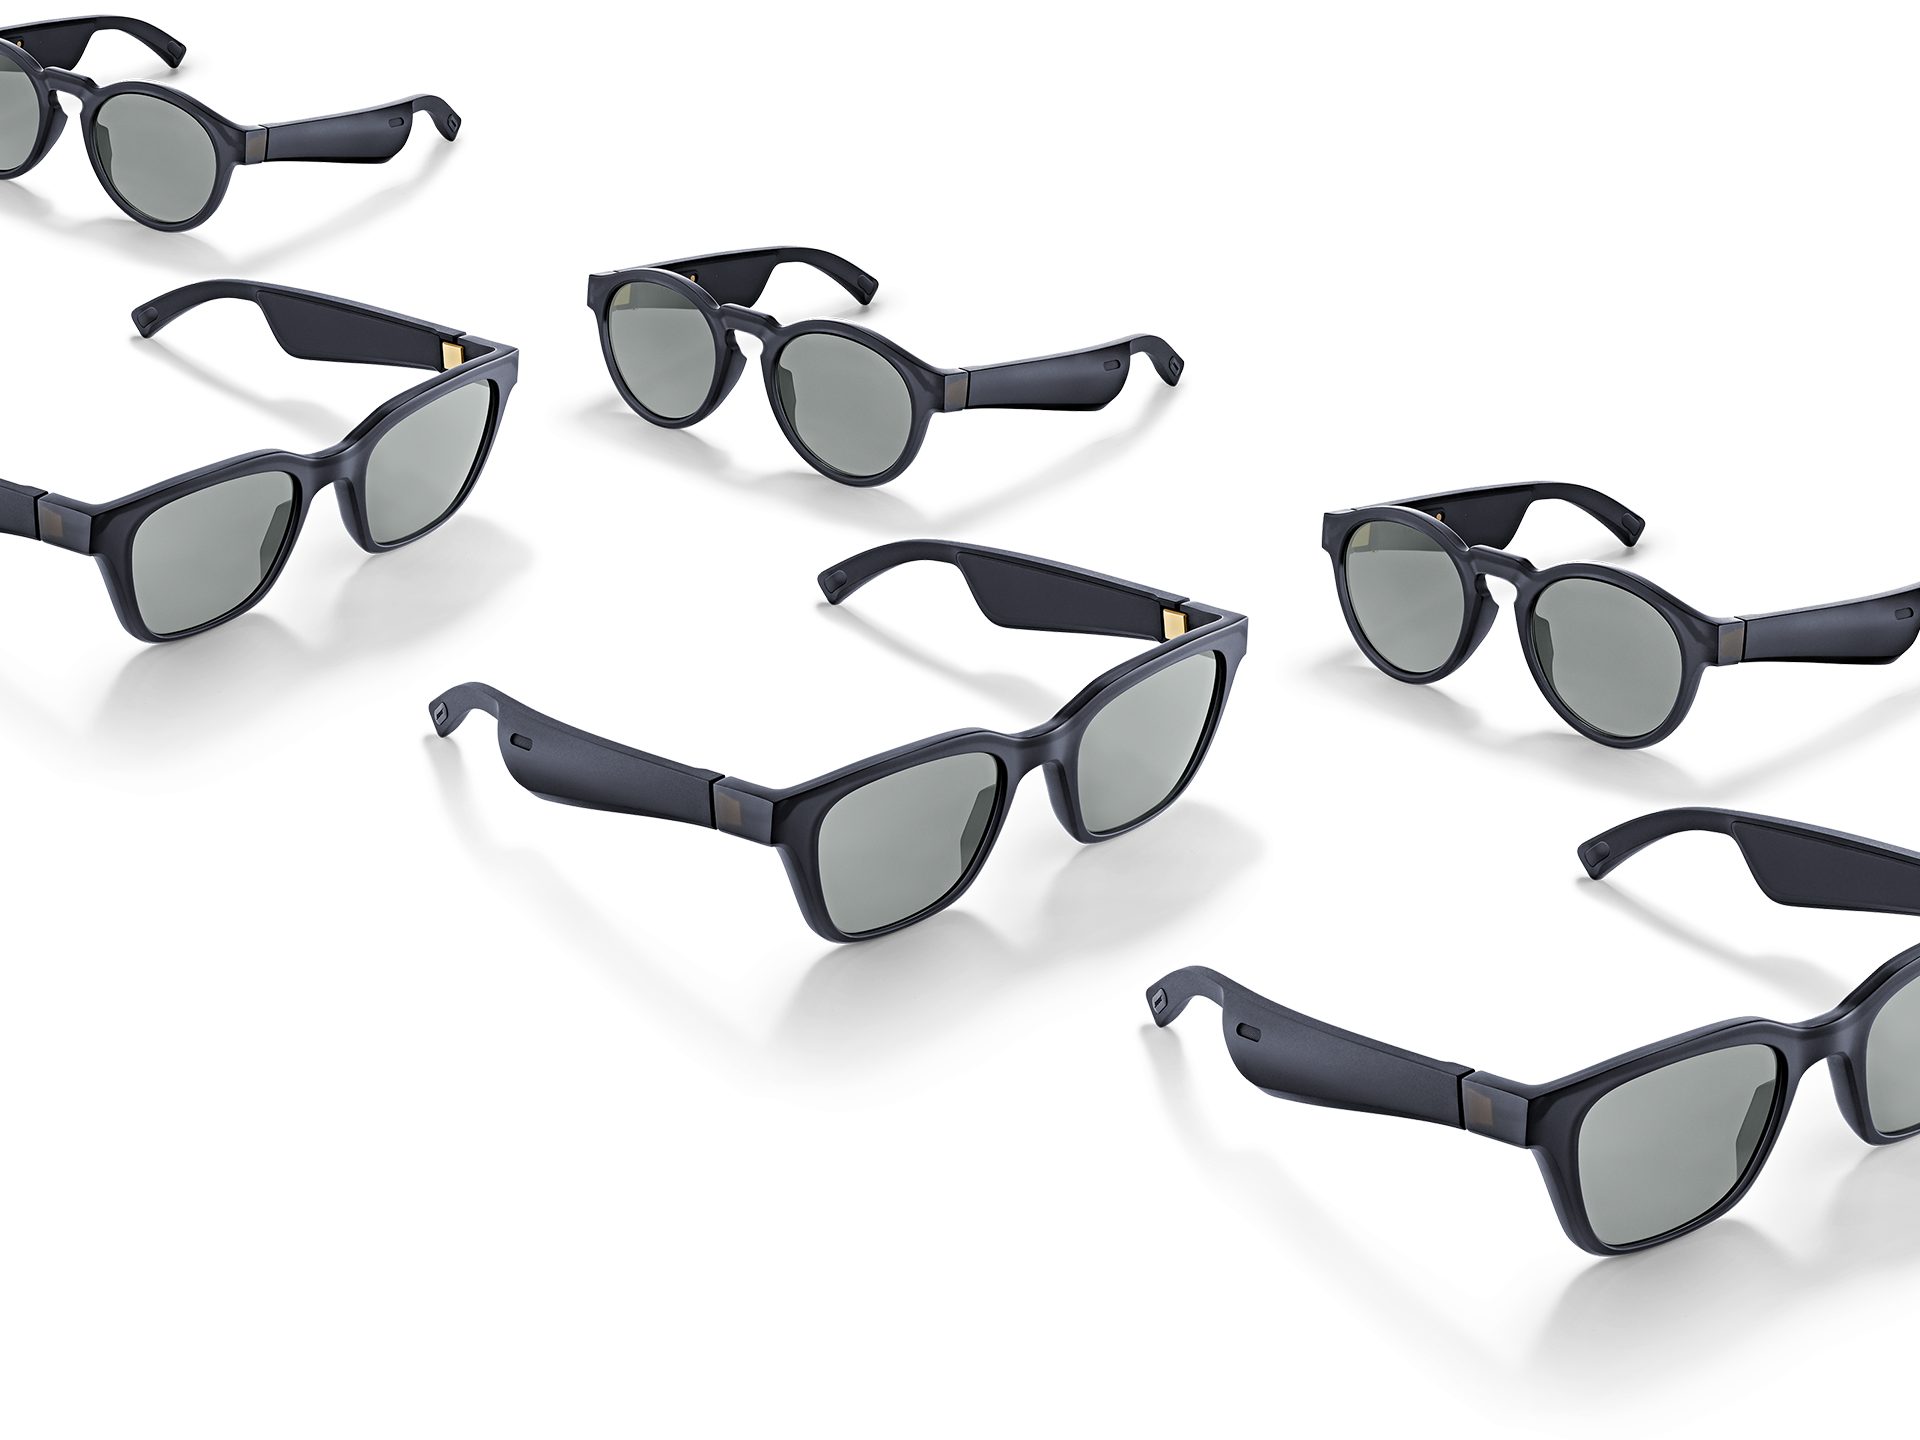 Augmented reality has come to wearable audio, like these Bose sunglasses that contain sensors that can detect where the wearer is looking and play information back about what they see